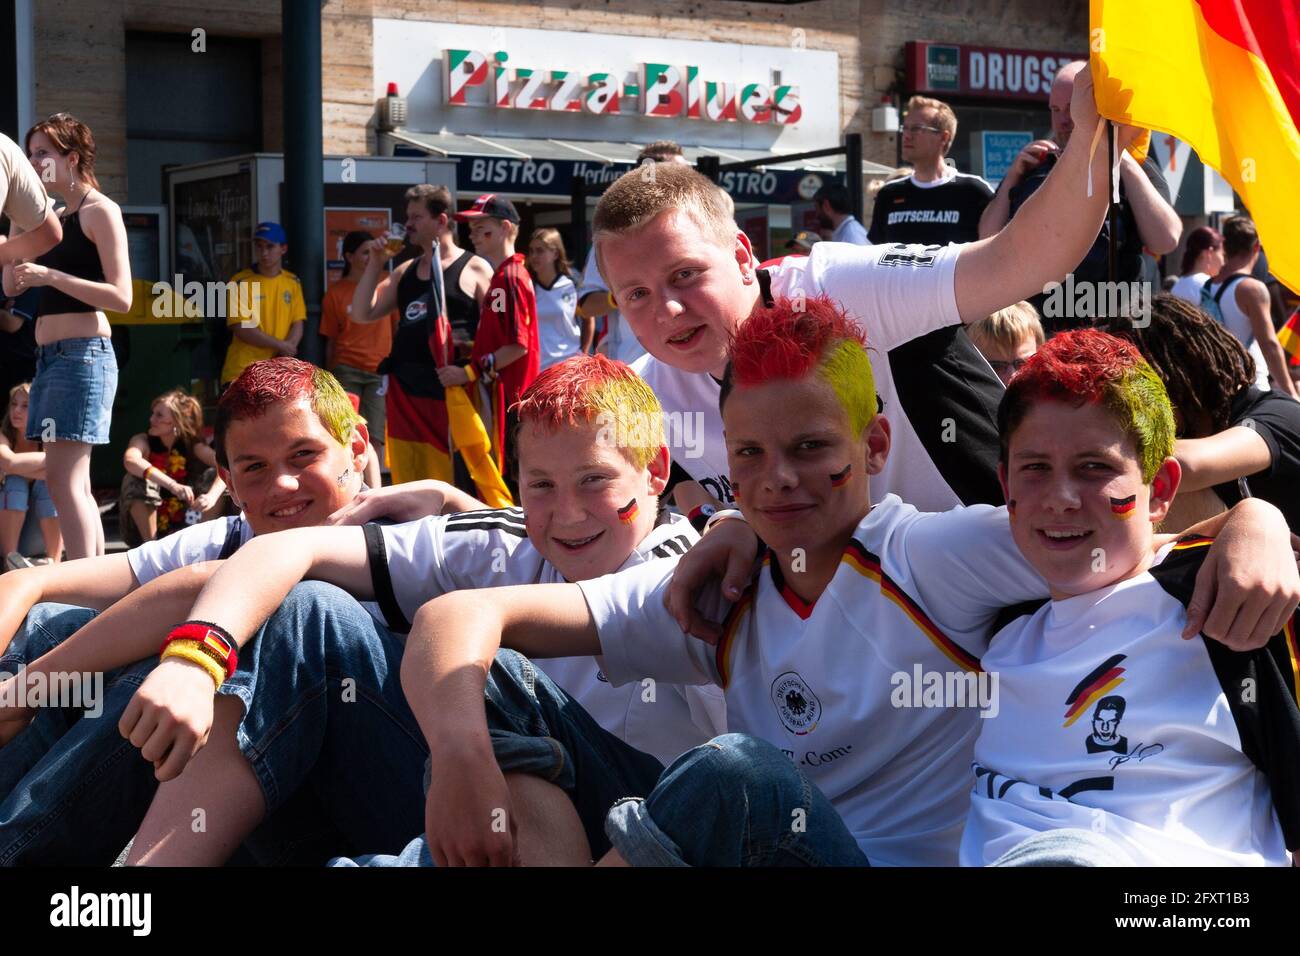 Public viewing: A group of young people celebrate the 2006 World Cup Stock Photo